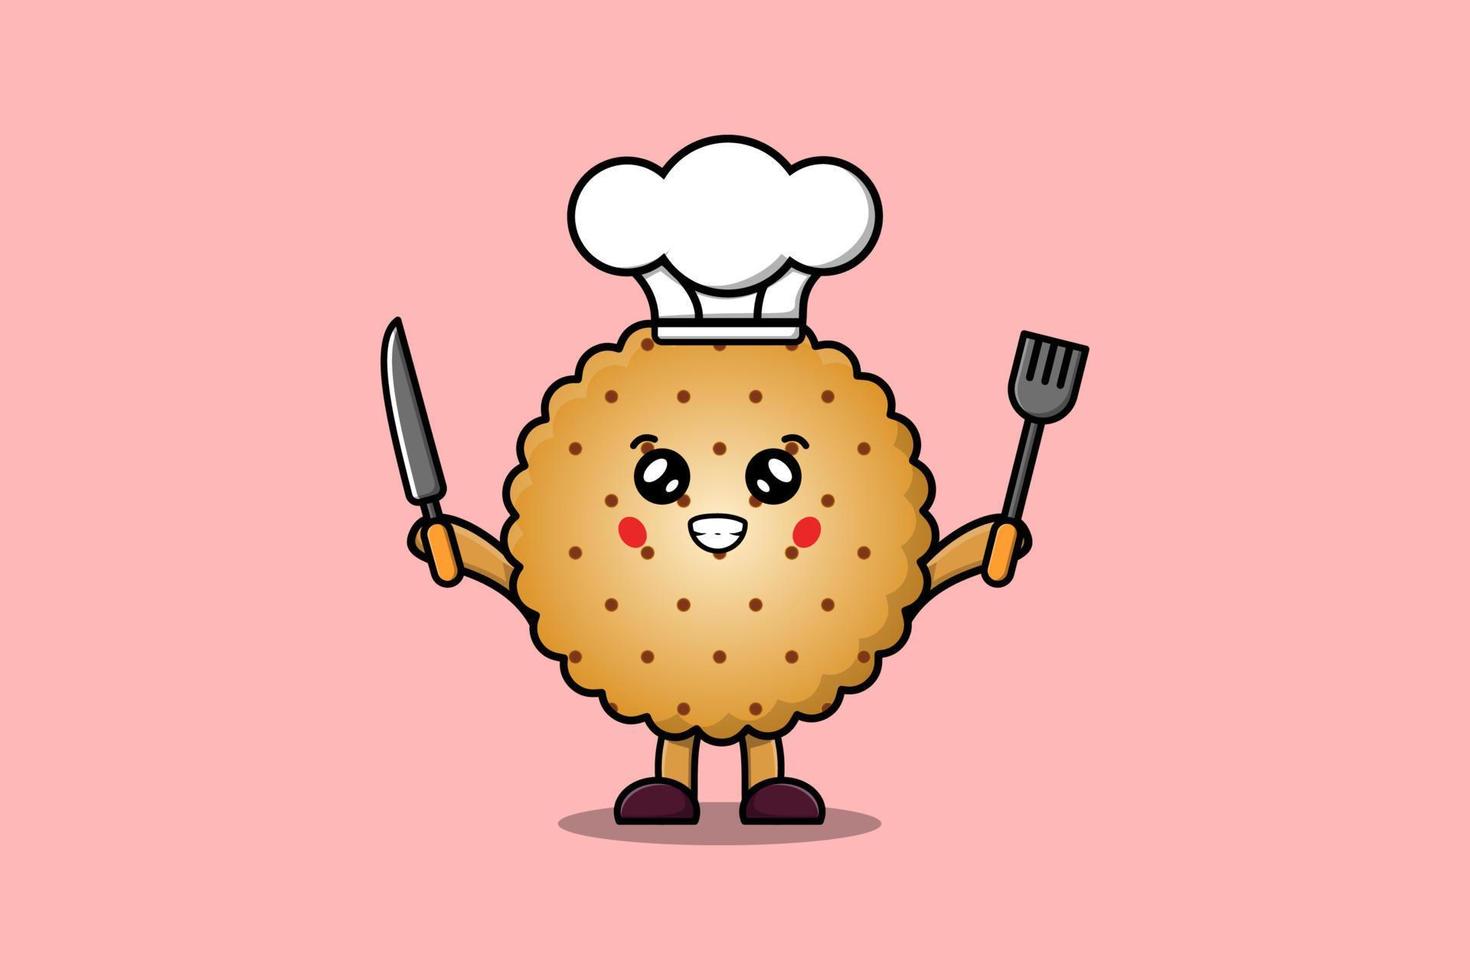 Cute cartoon Cookies chef holding knife and fork vector